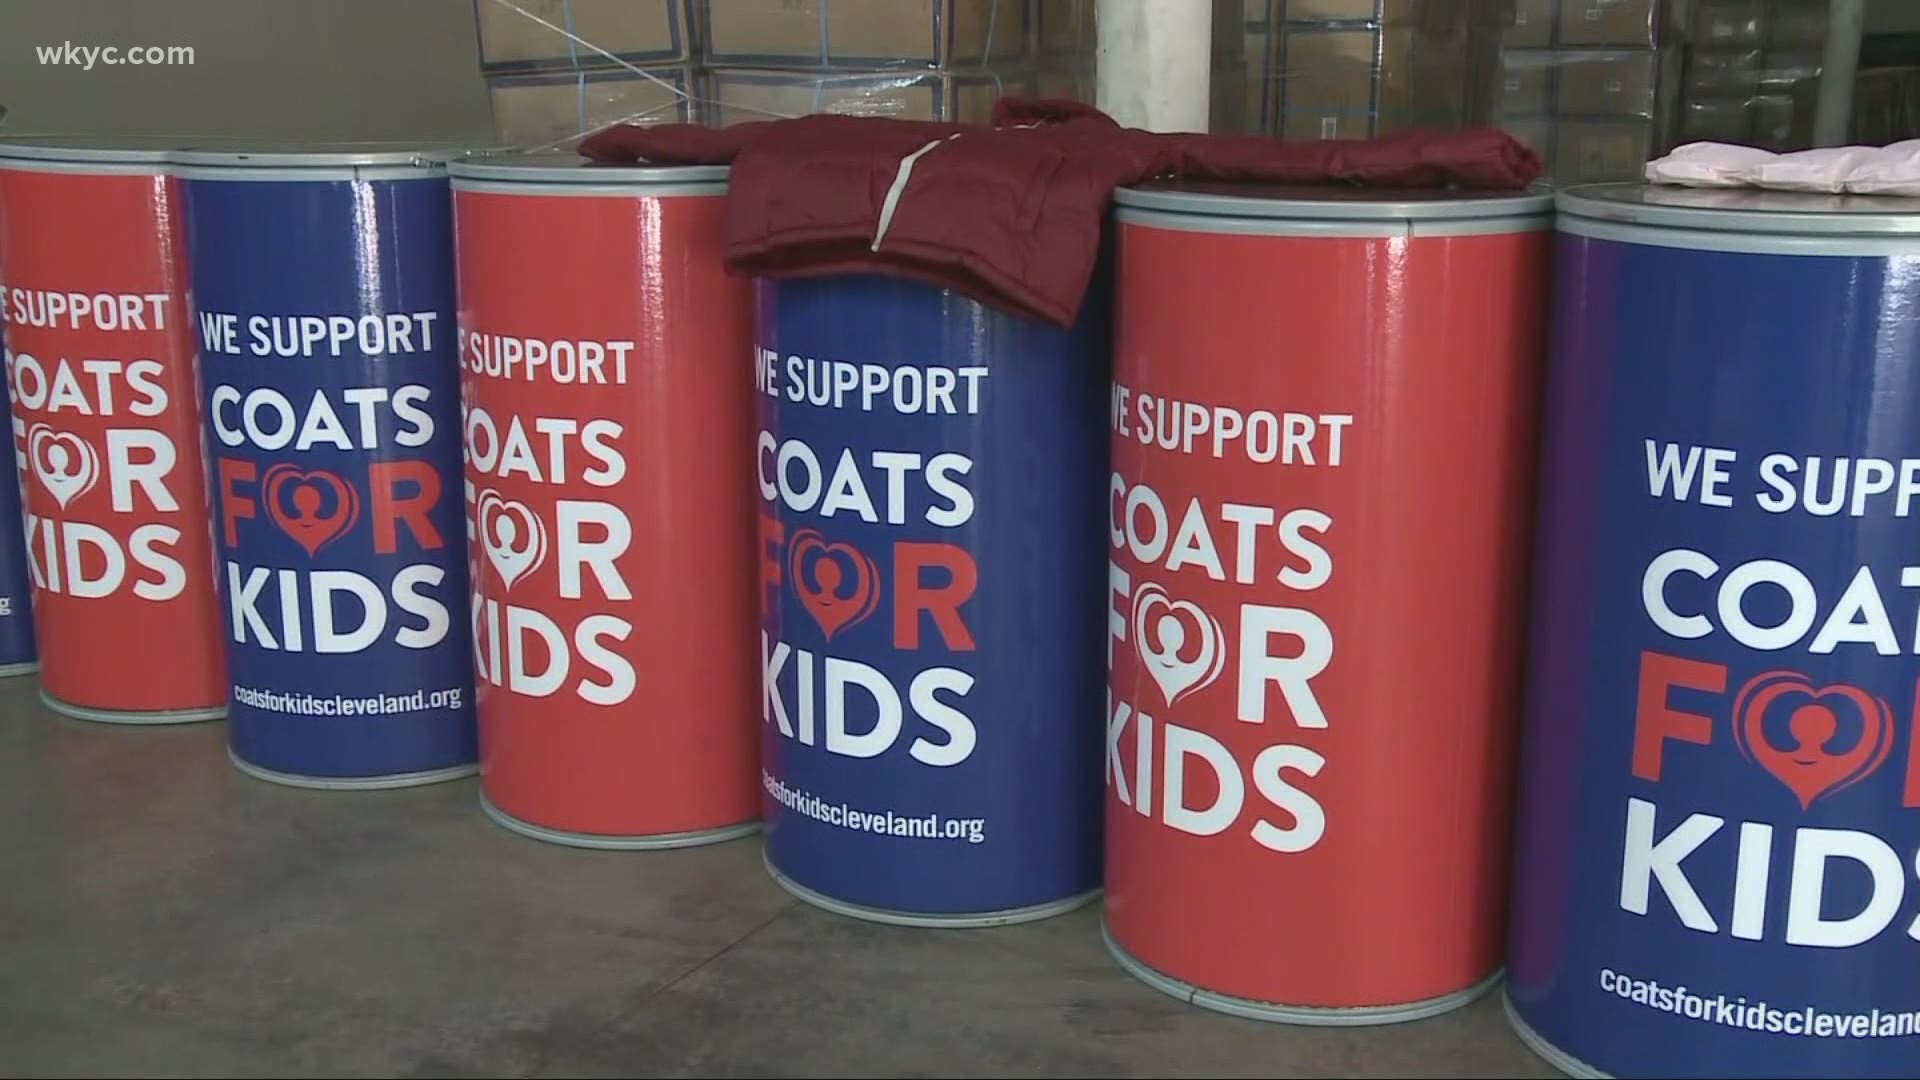 Nov. 12, 2020: The Coats for Kids initiative is back in action. Here's how you can help!